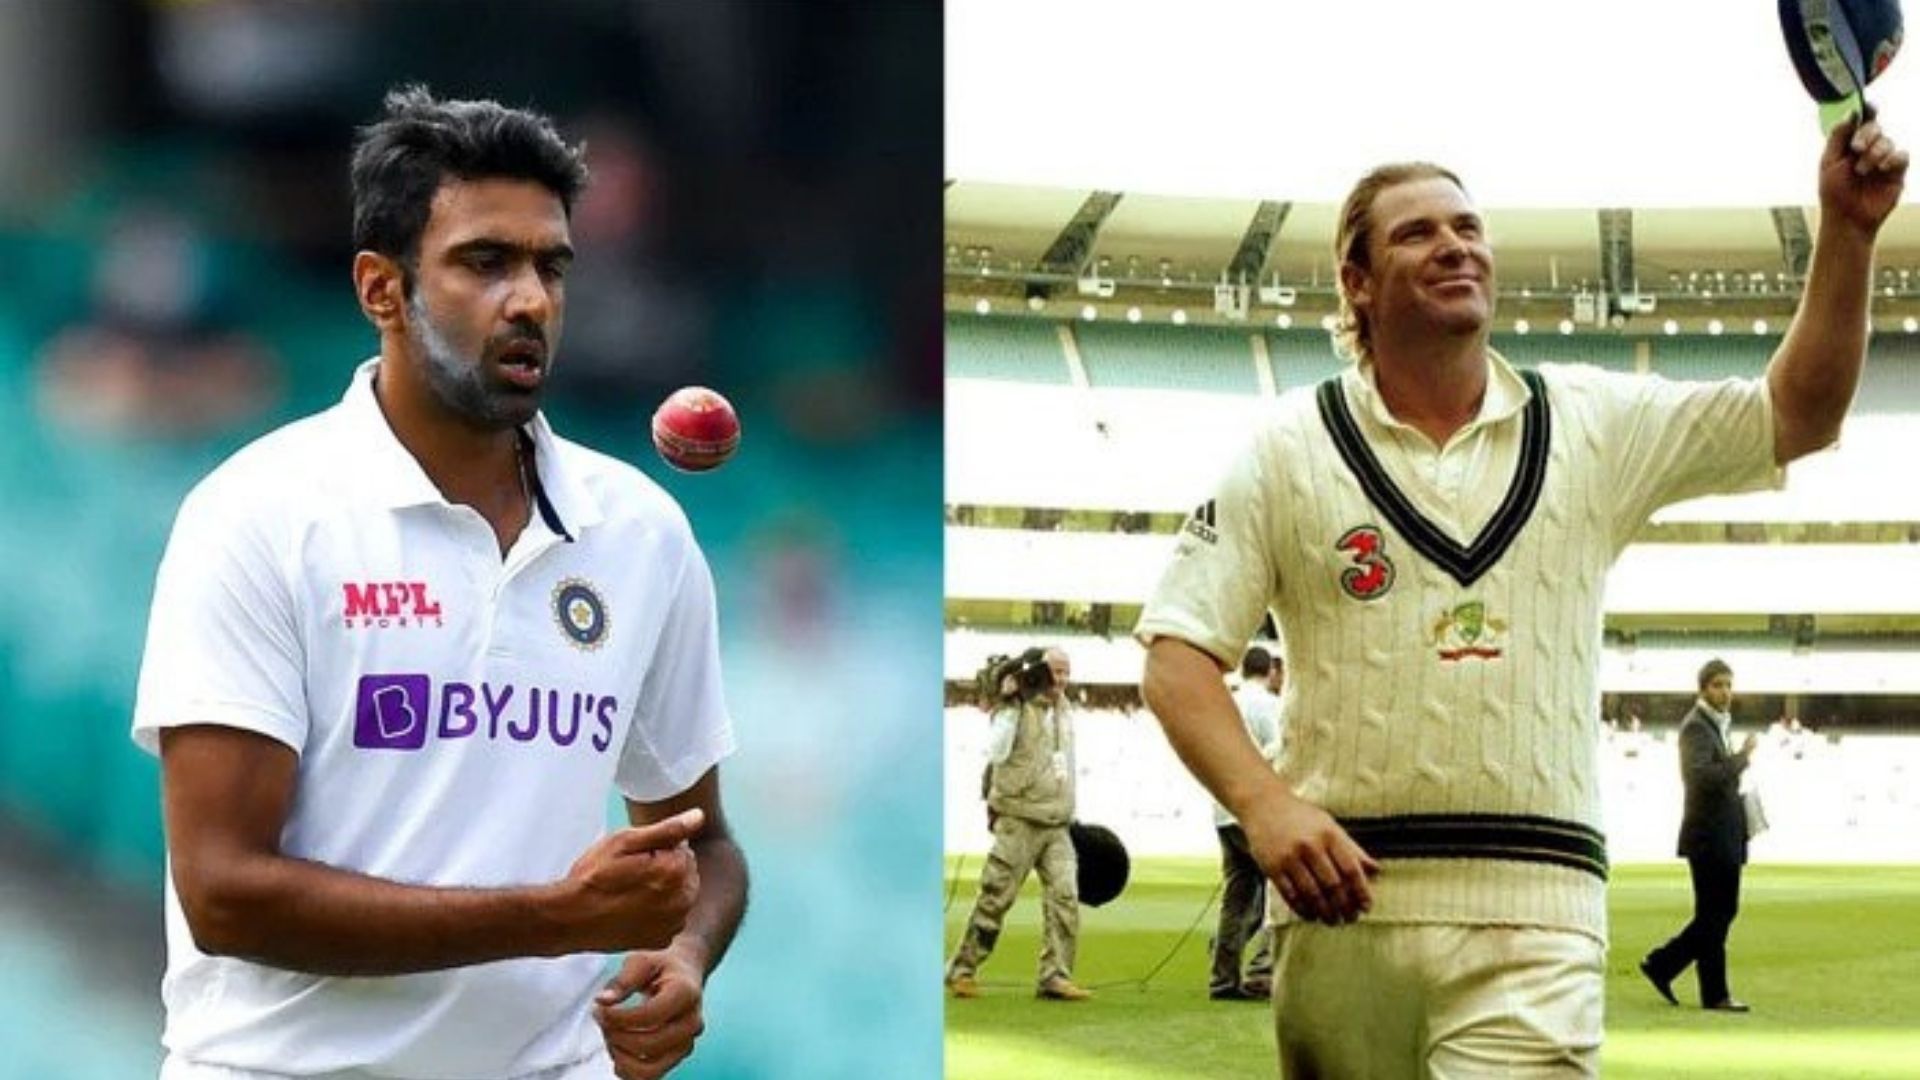 Ashwin paid his tribute to the late Shane Warne on his YouTube channel